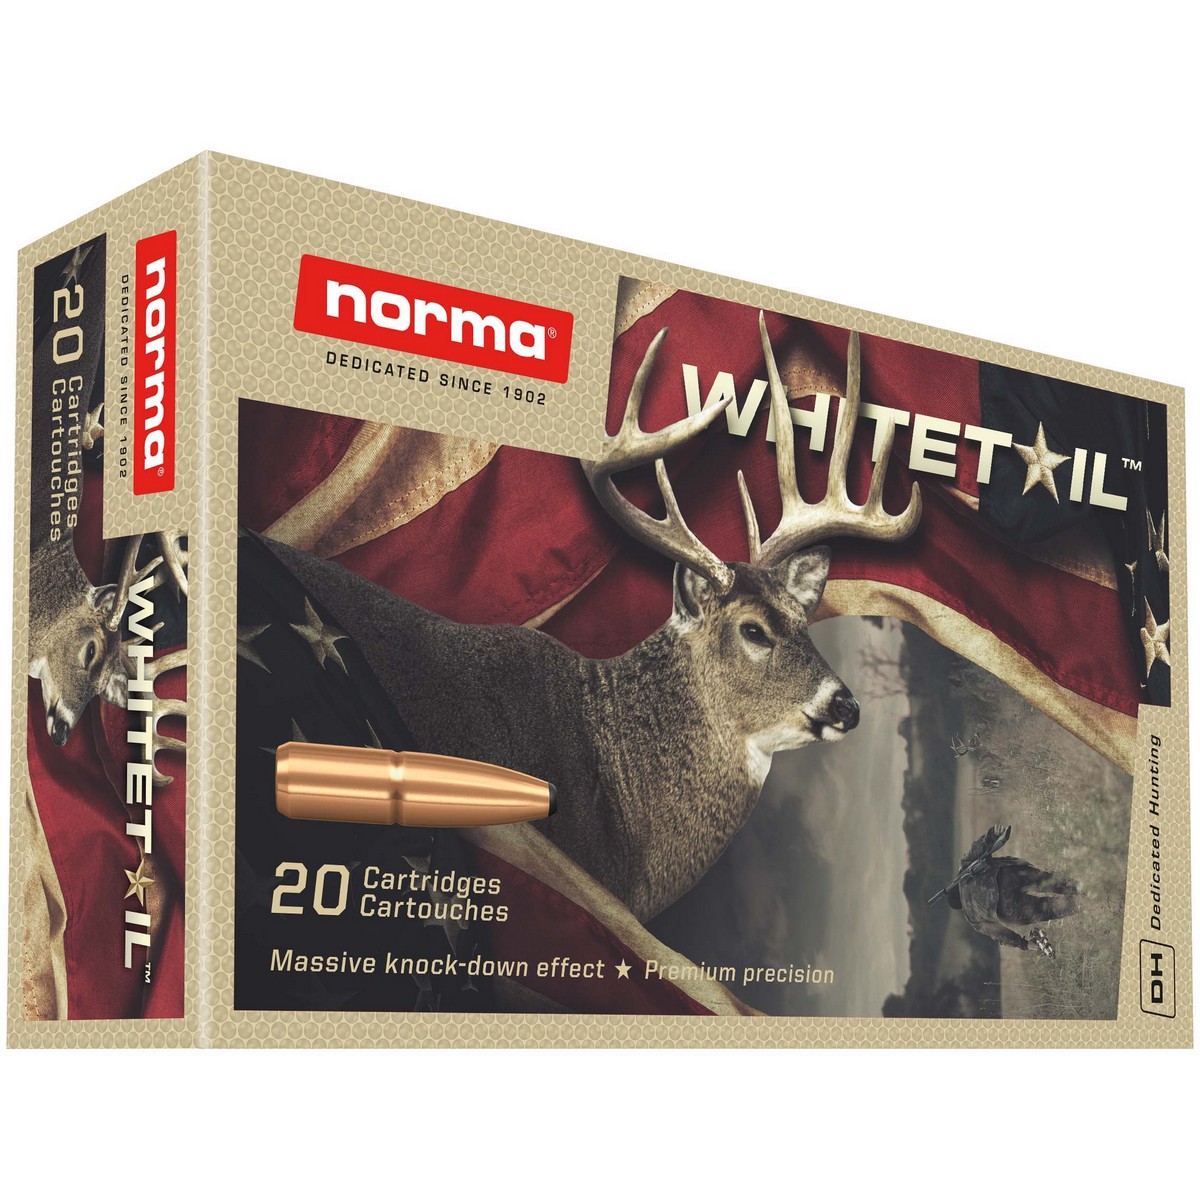 ma Whitetail 270 Win 130 Gr PSP 20 Rd Ammo